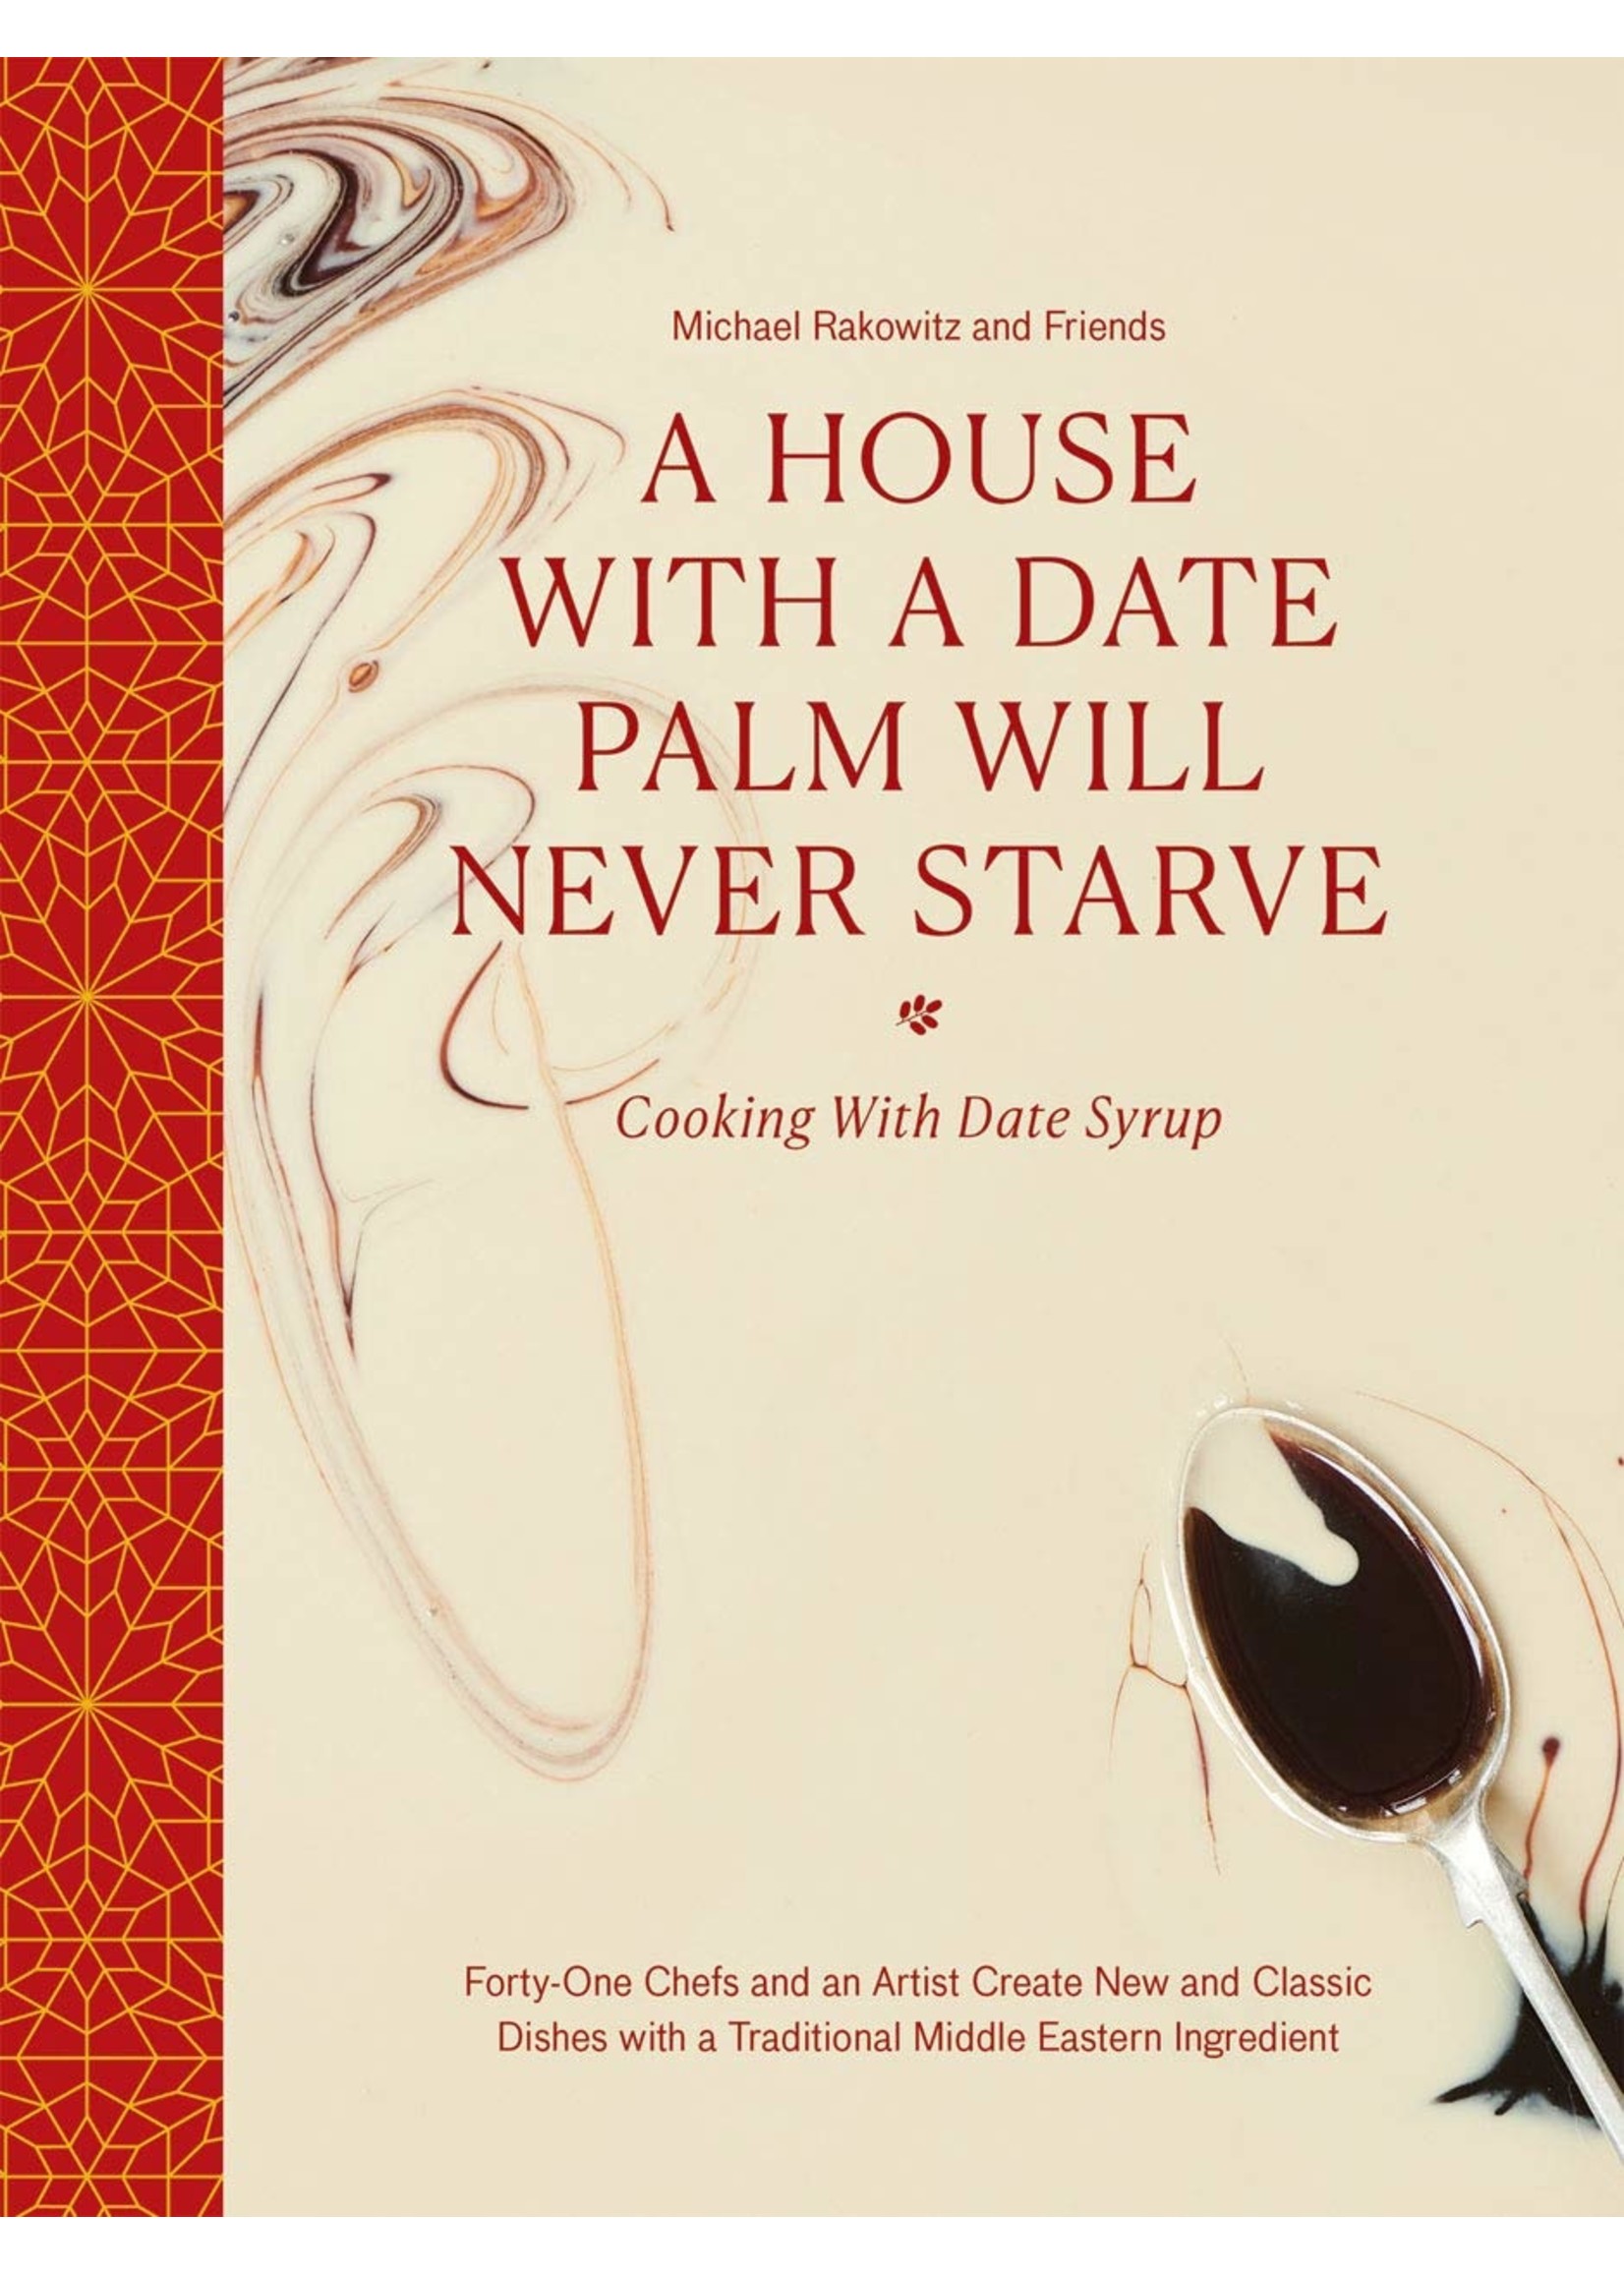 A House With A Date Palm Will Never Starve: Cooking with Date Syrup